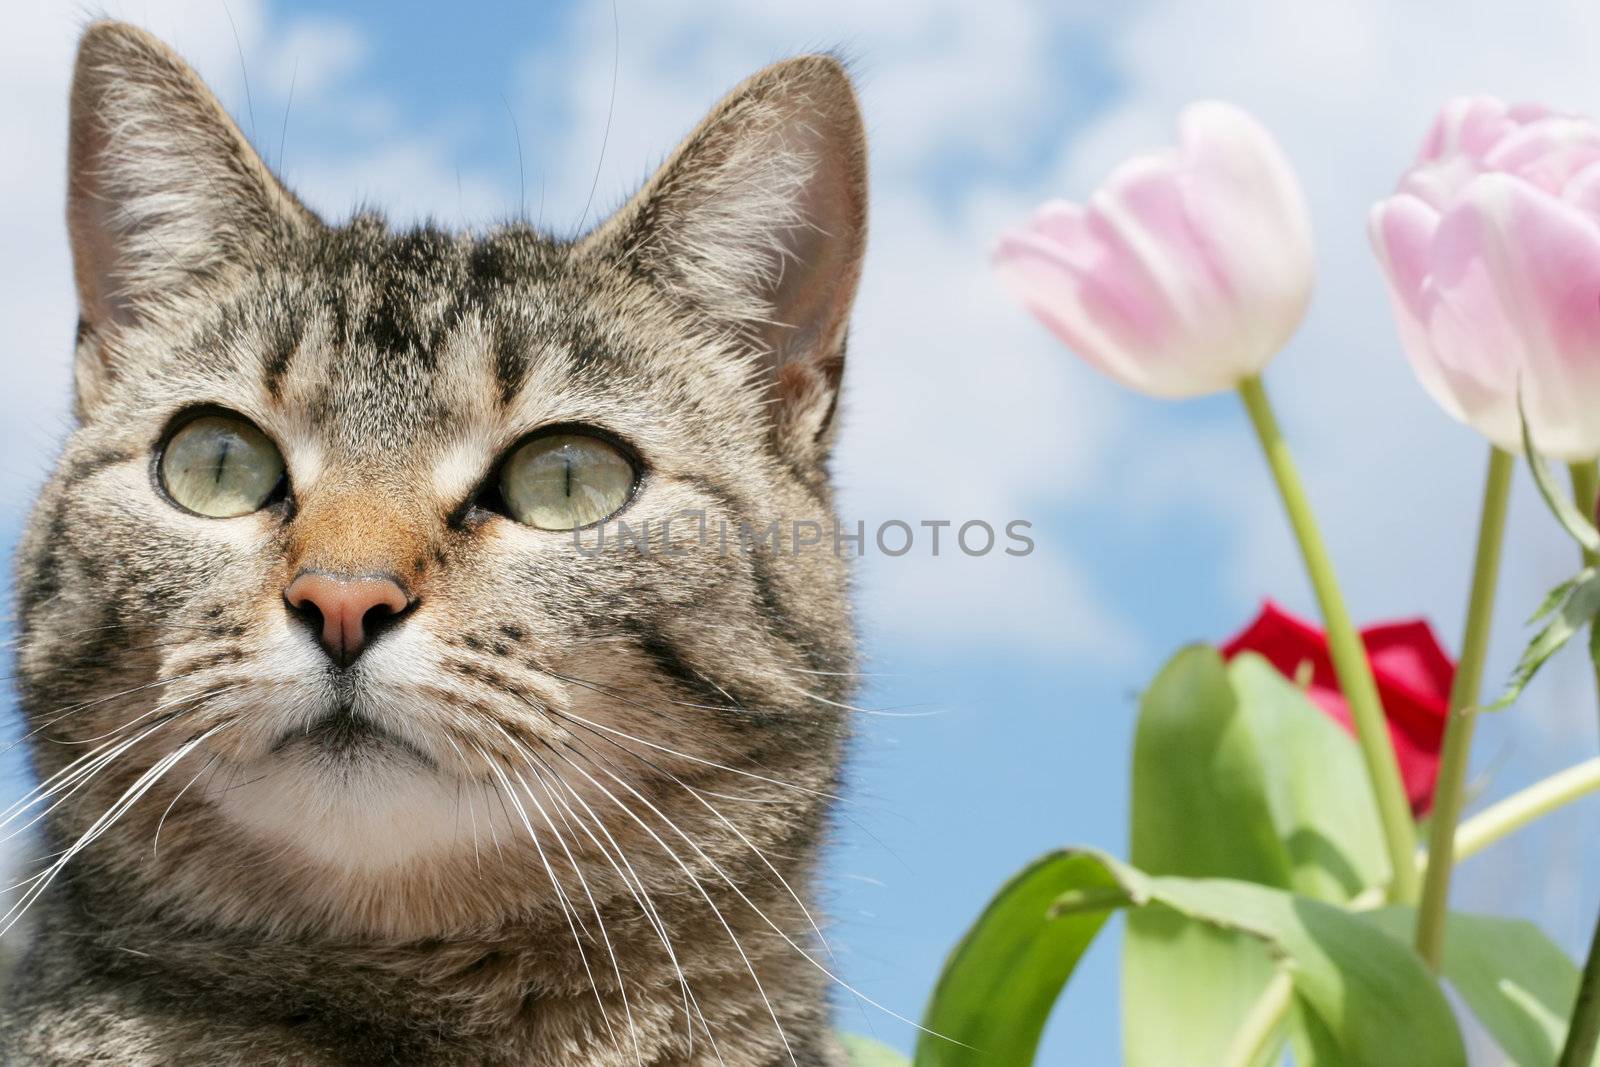 Gray tabby cat standing among tulips and blue skies